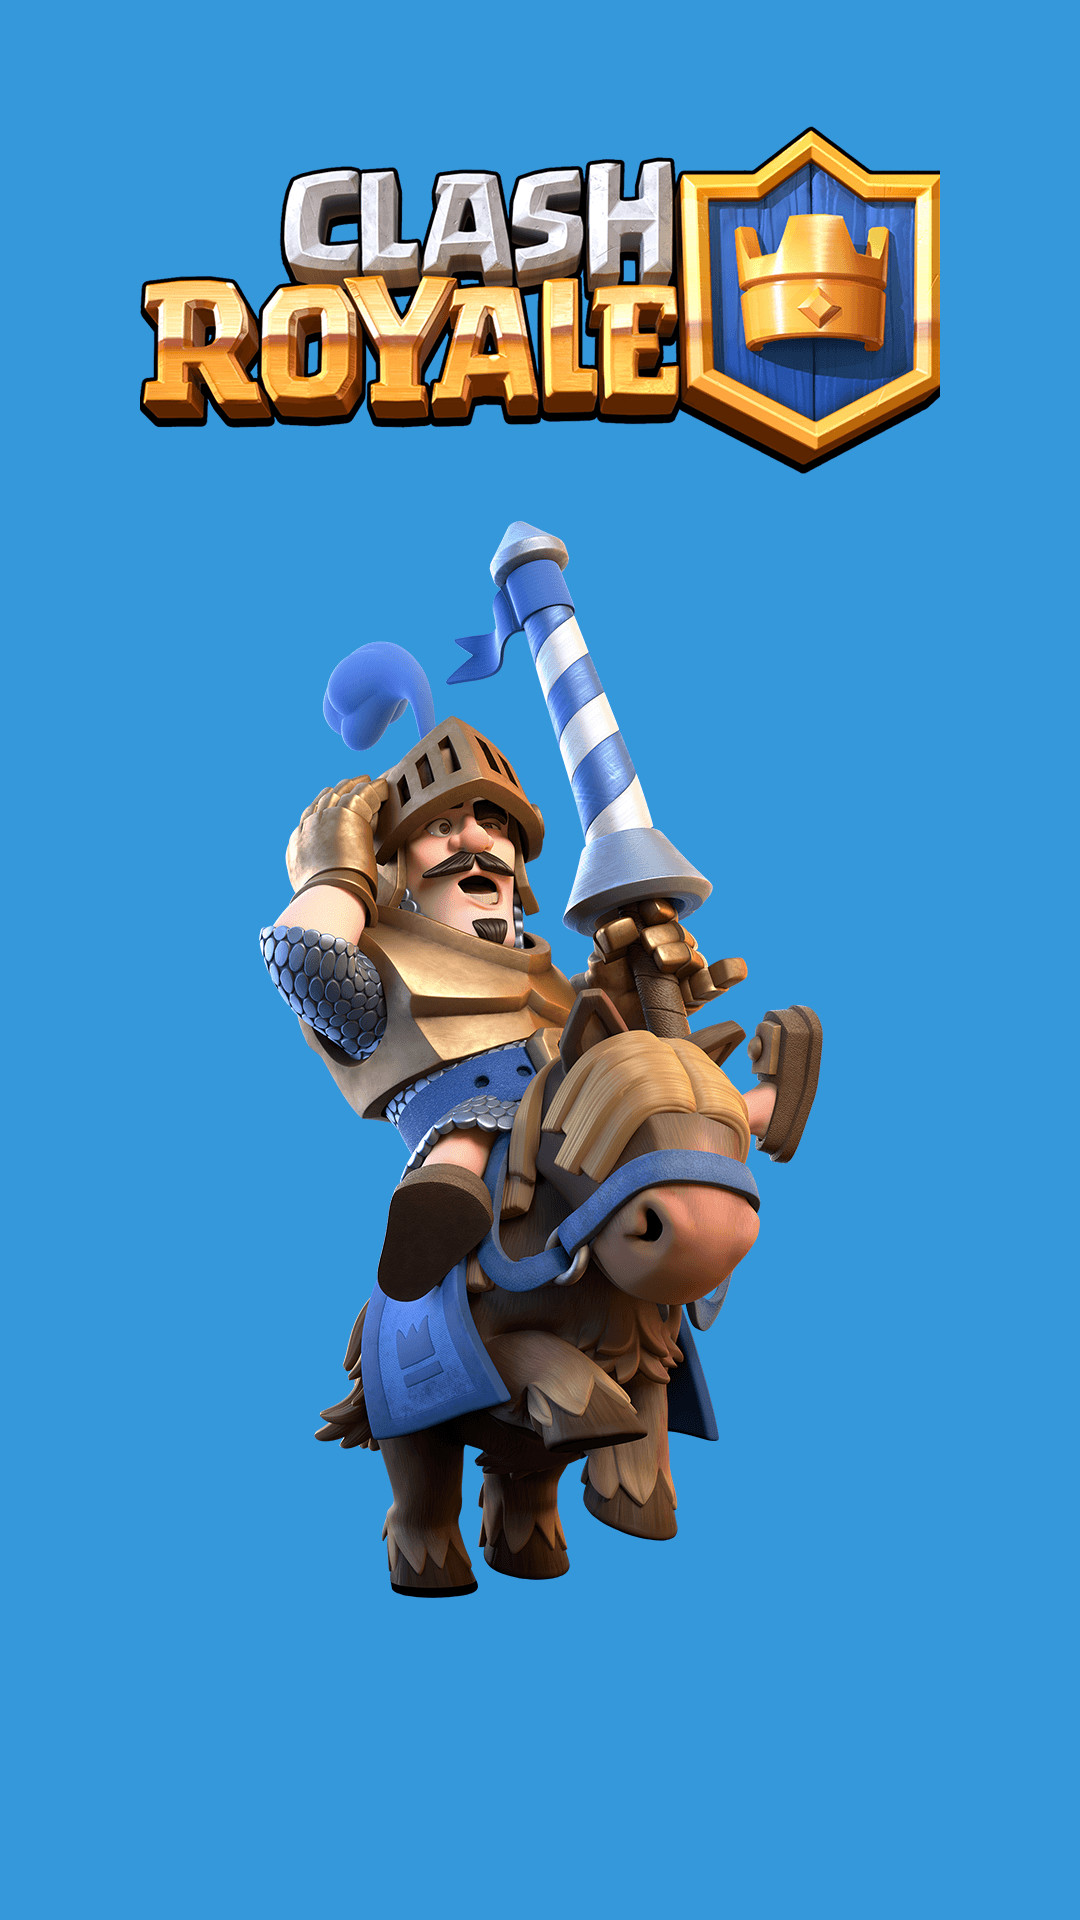 1080x1920 The Blue Prince Clash Royale Games iPhone Wallpaper - Wallpapers .